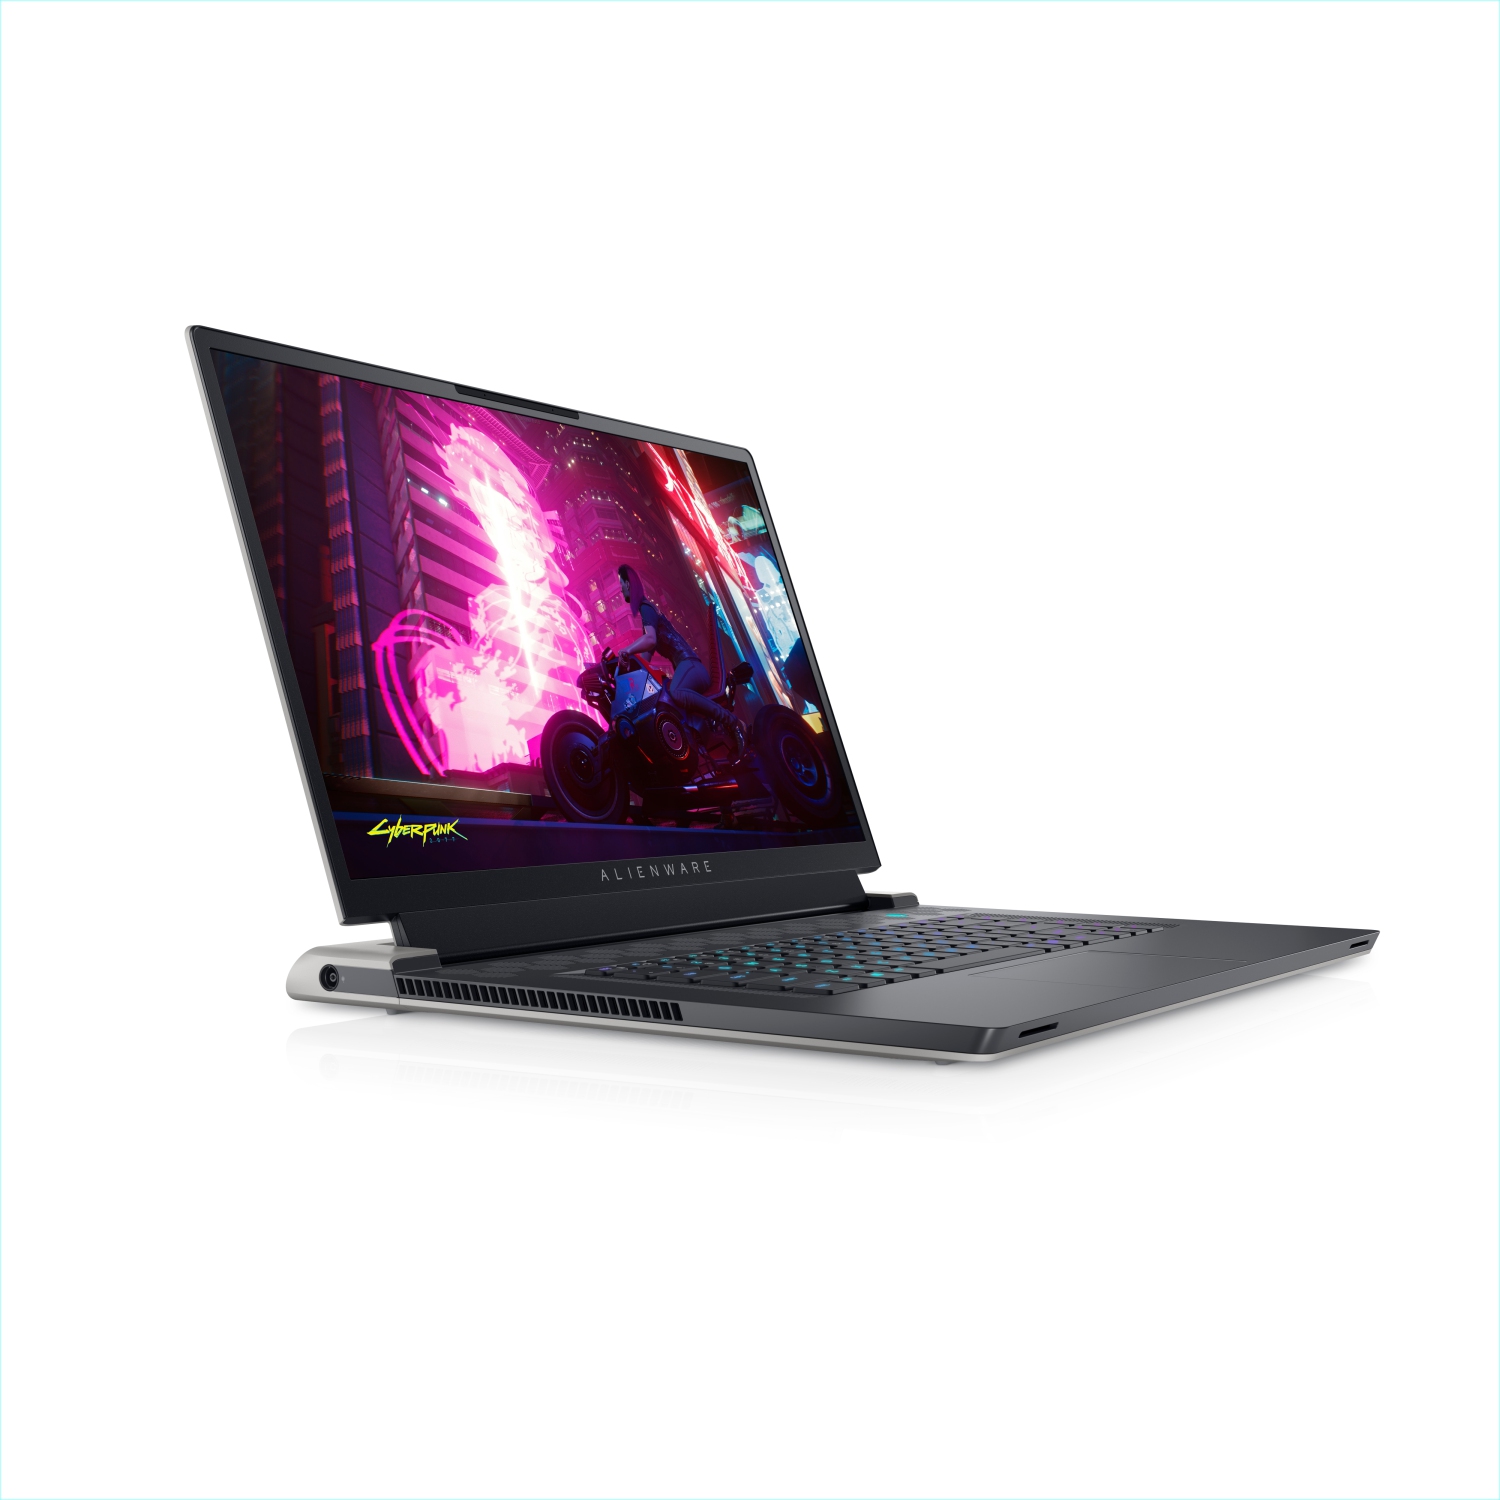 Refurbished (Excellent) – Dell Alienware X17 R1 Gaming Laptop (2021) | 17.3" FHD | Core i7 - 1TB SSD - 64GB RAM - RTX 3070 | 8 Cores @ 4.6 GHz - 11th Gen CPU - 8GB GDDR6